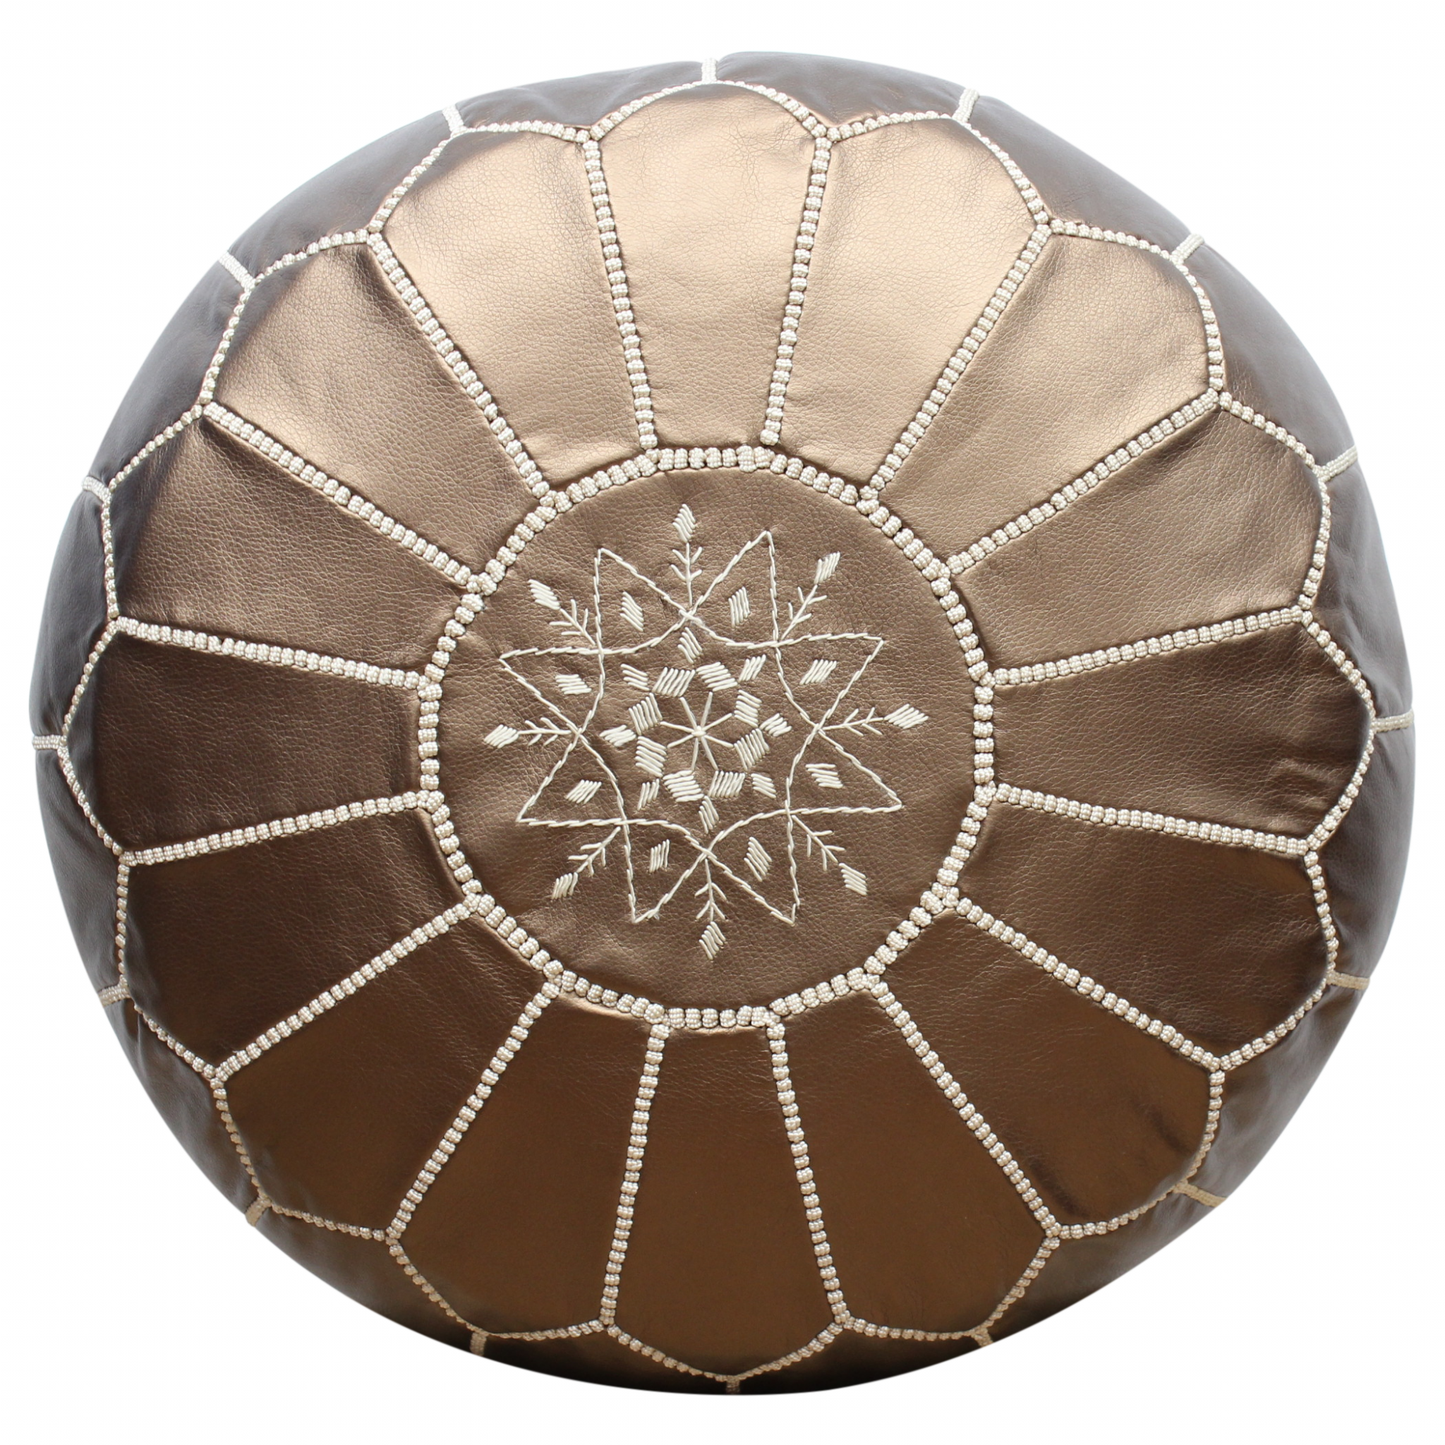 moroccan-pouffe-pouf-ottoman-footstool-metallic-bronze-in-faux-leather-cover